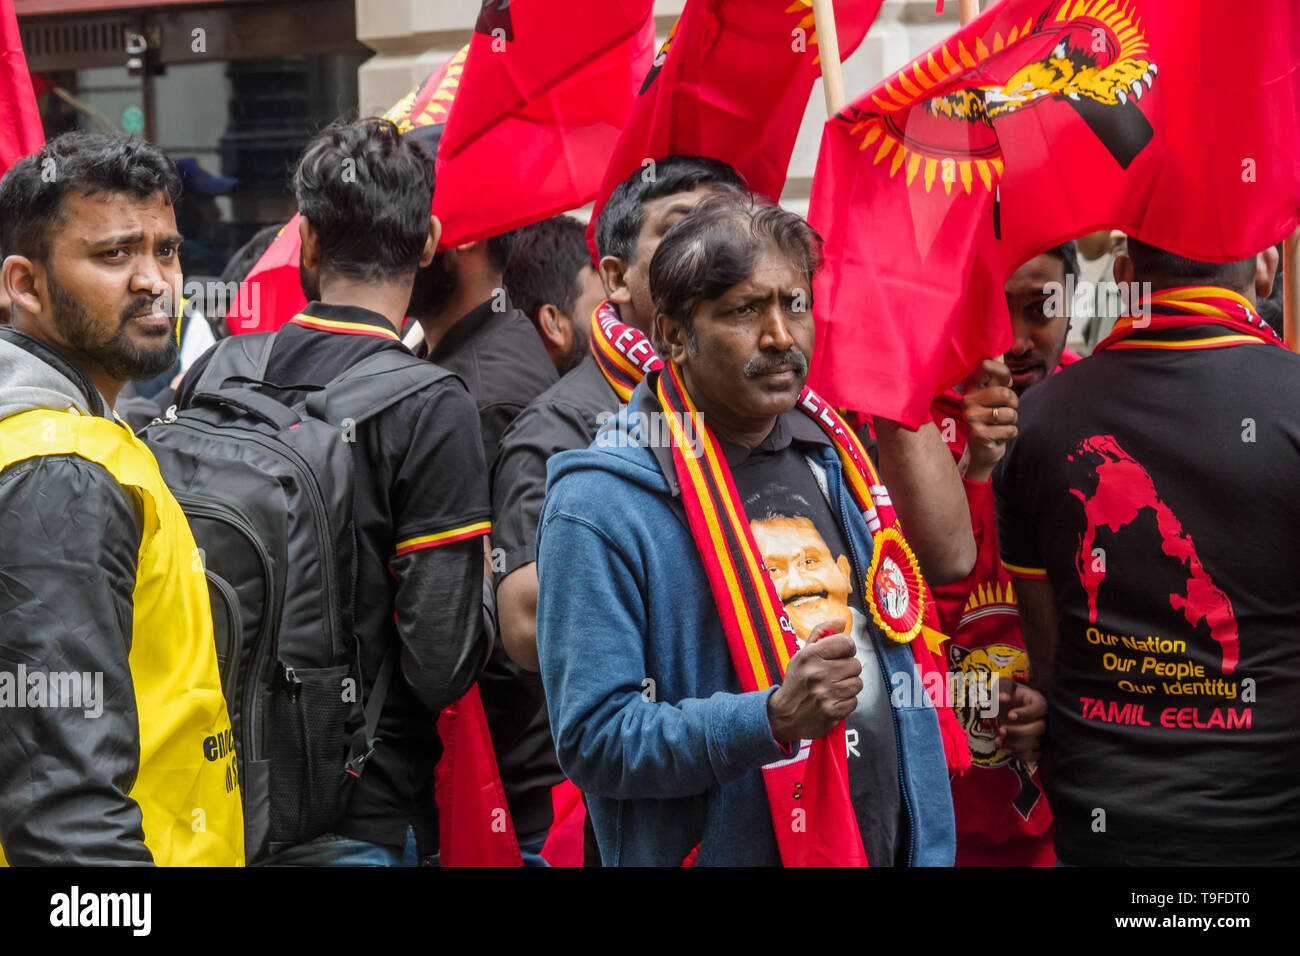 London, UK. 18th May 2019. Several thousand Tamils, many with Tamil Eelam flags, march through London on Mullivaikkal Remembrance Day in memory of those killed by Sri Lanka’s genocidal war against the Tamils, which ended ten years ago. Many wore shirts with maps of Tami Eelam or pictures of LTTE founder Velupillai Prabhakaran. They call for a political solution which gives Tamils back control of their homeland of Tamil Eelam, and for an end to the ban on the Tamil Tigers. Public commemorations of the many thousands of war dead are forbidden in Sri Lanka. Peter Marshall/Alamy Live News Stock Photo